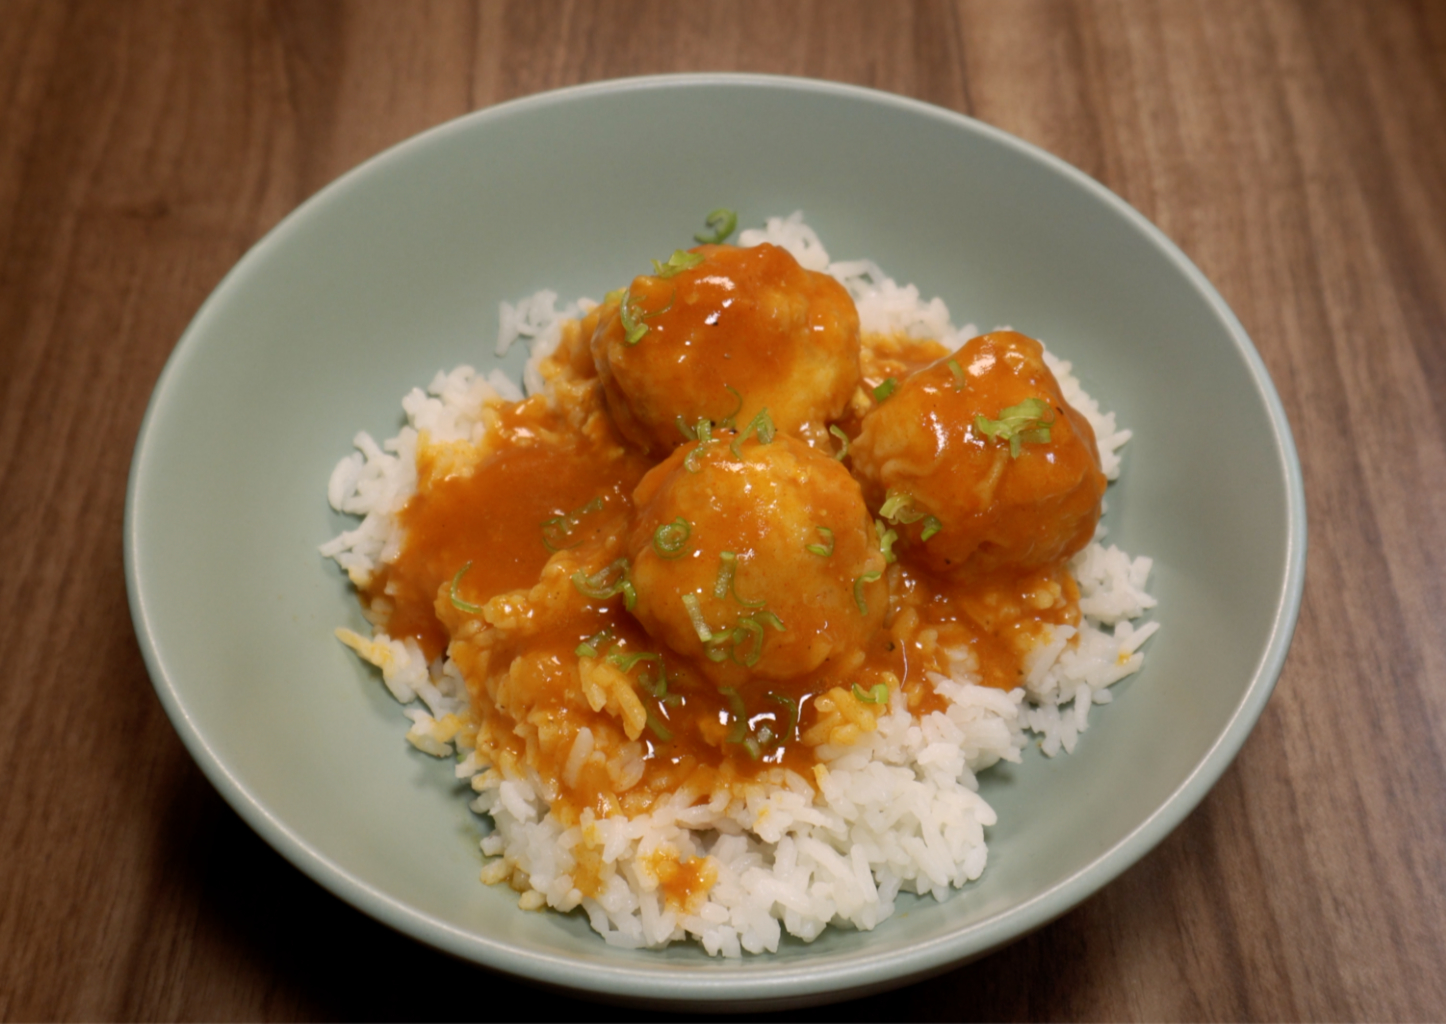 Easy Cod Fish Meatballs in Savory Sauce